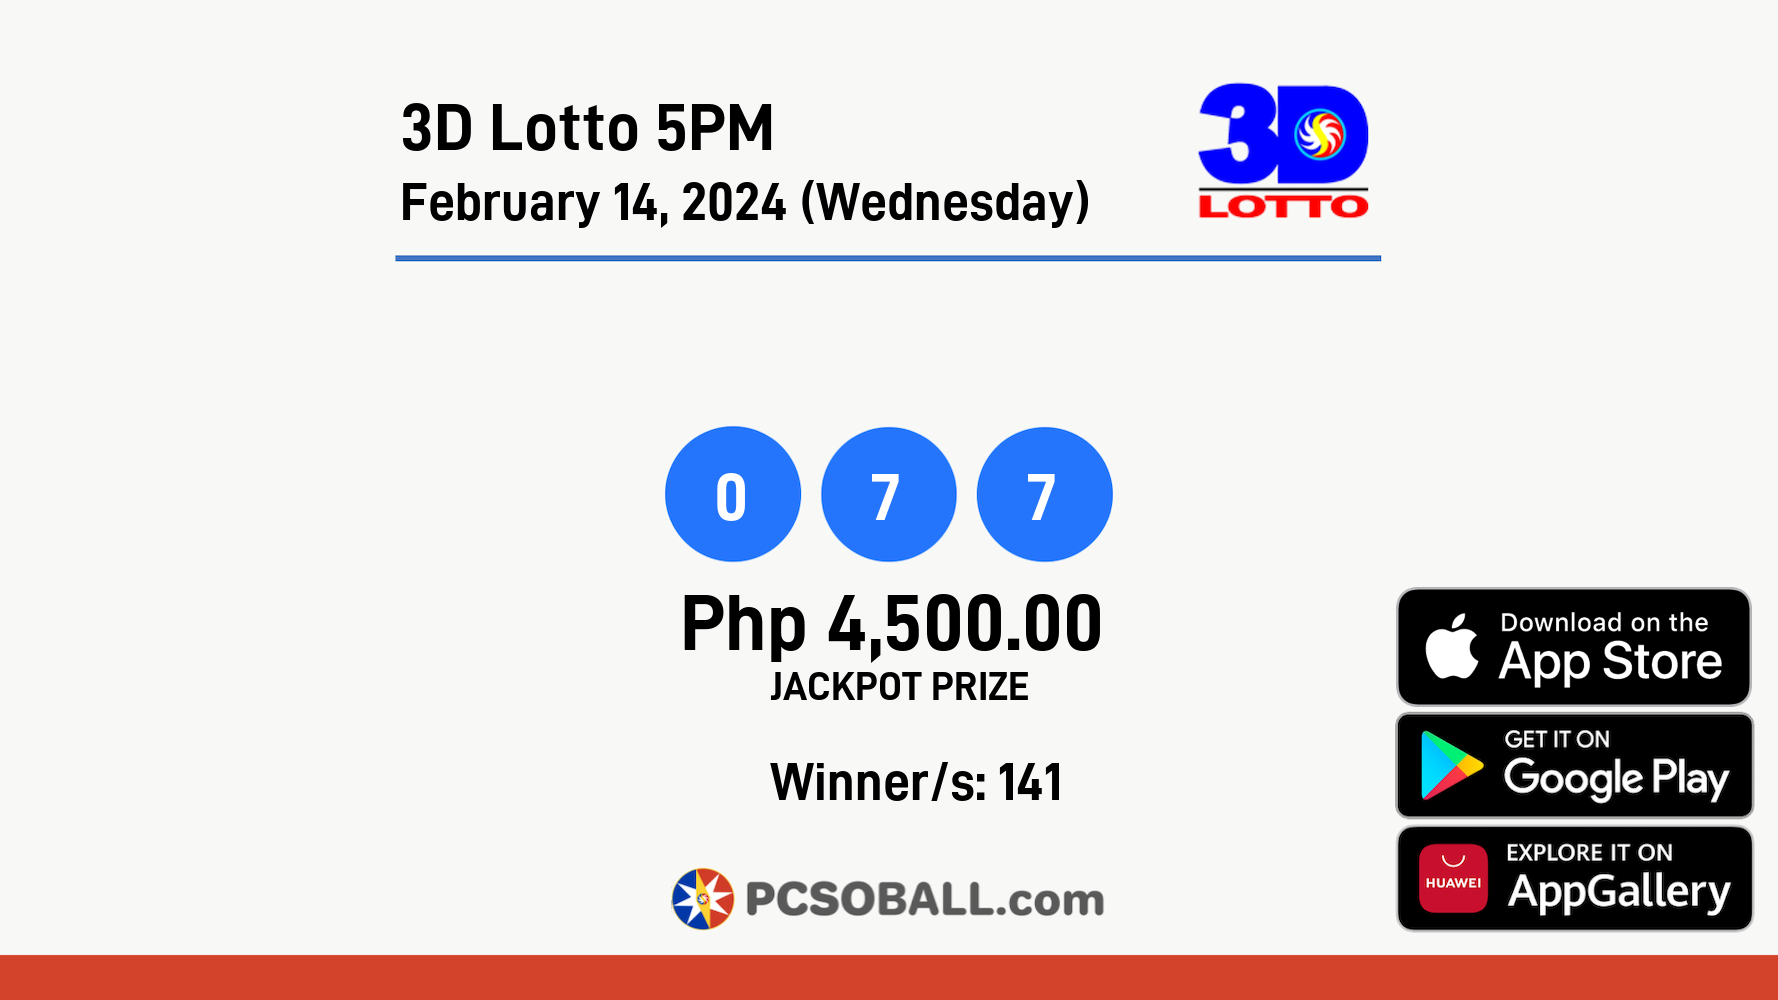 3D Lotto 5PM February 14, 2024 (Wednesday) Result